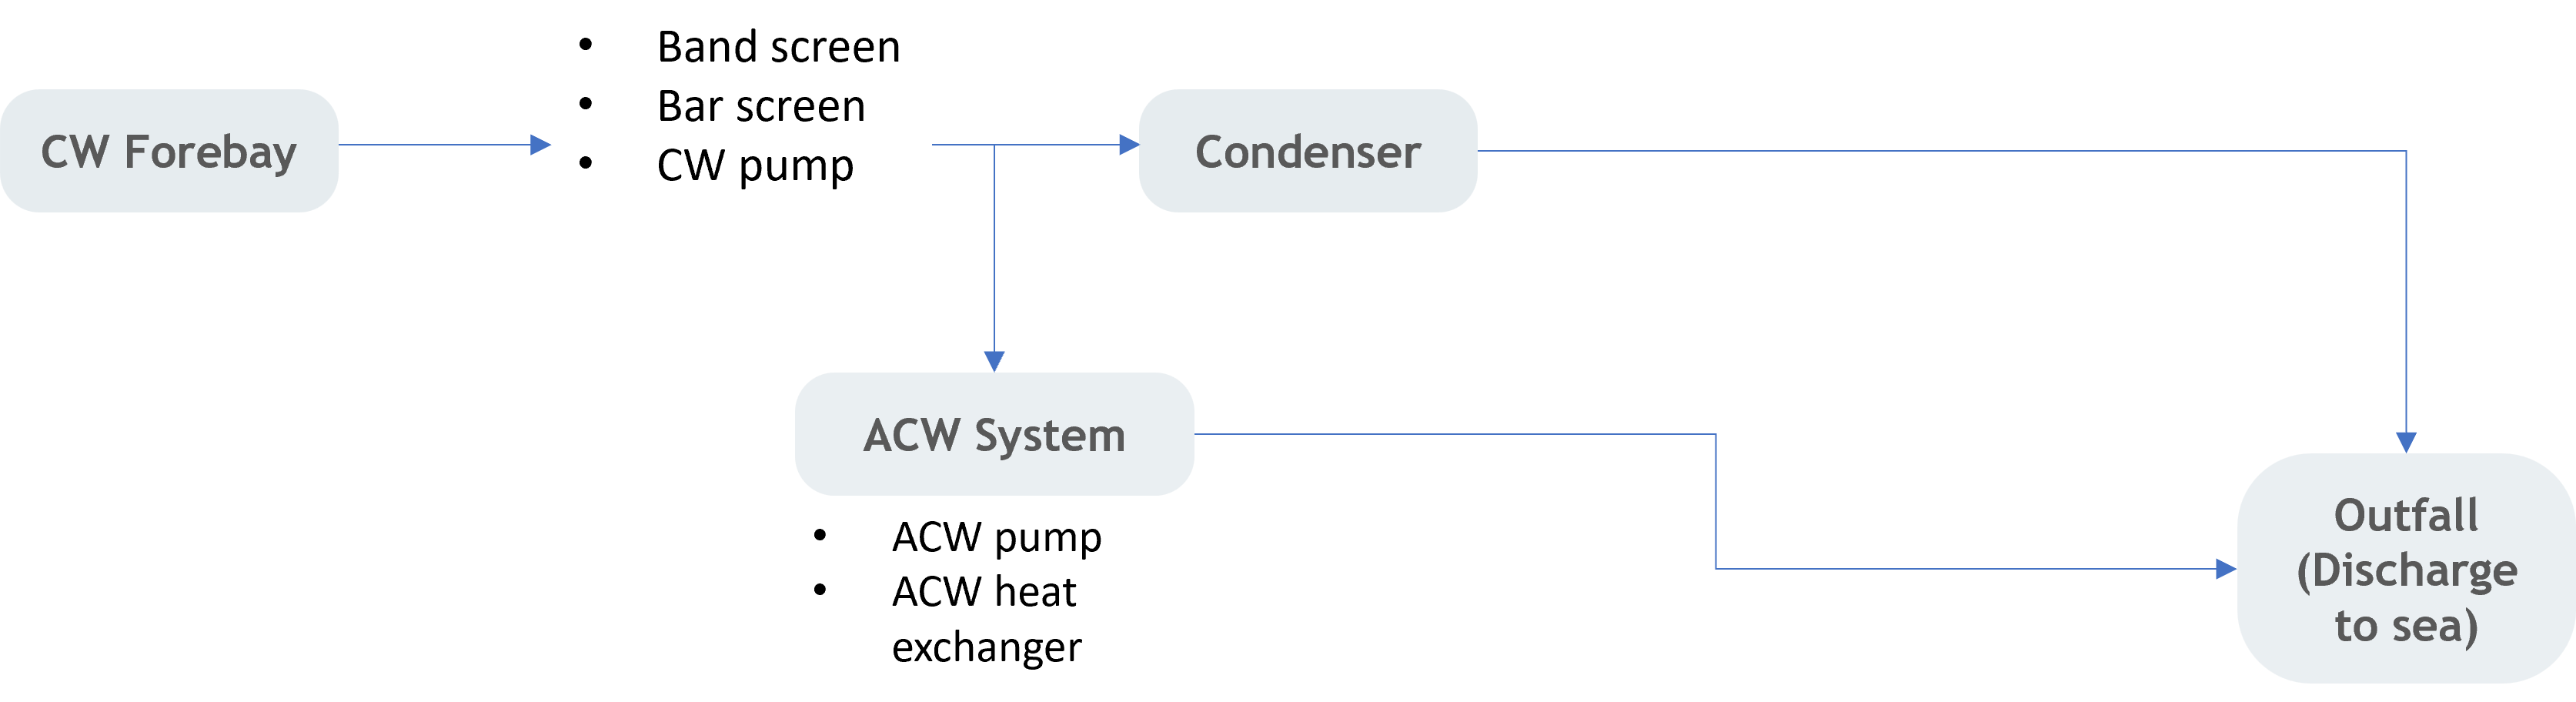 Simplified process of Main Cooling Water system